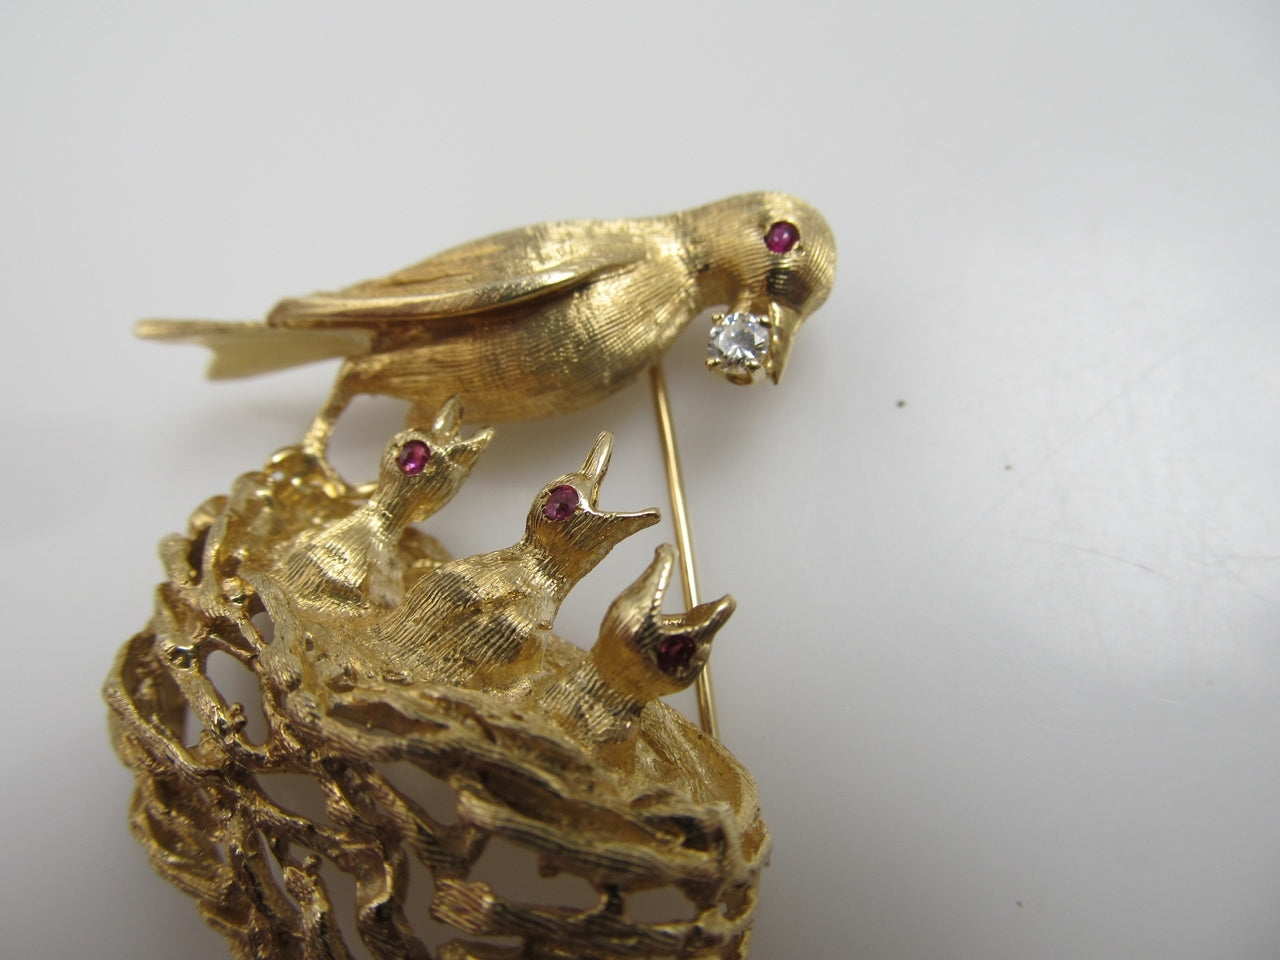 14k yellow gold bird and nest pin with rubies and a diamond, circa 1960